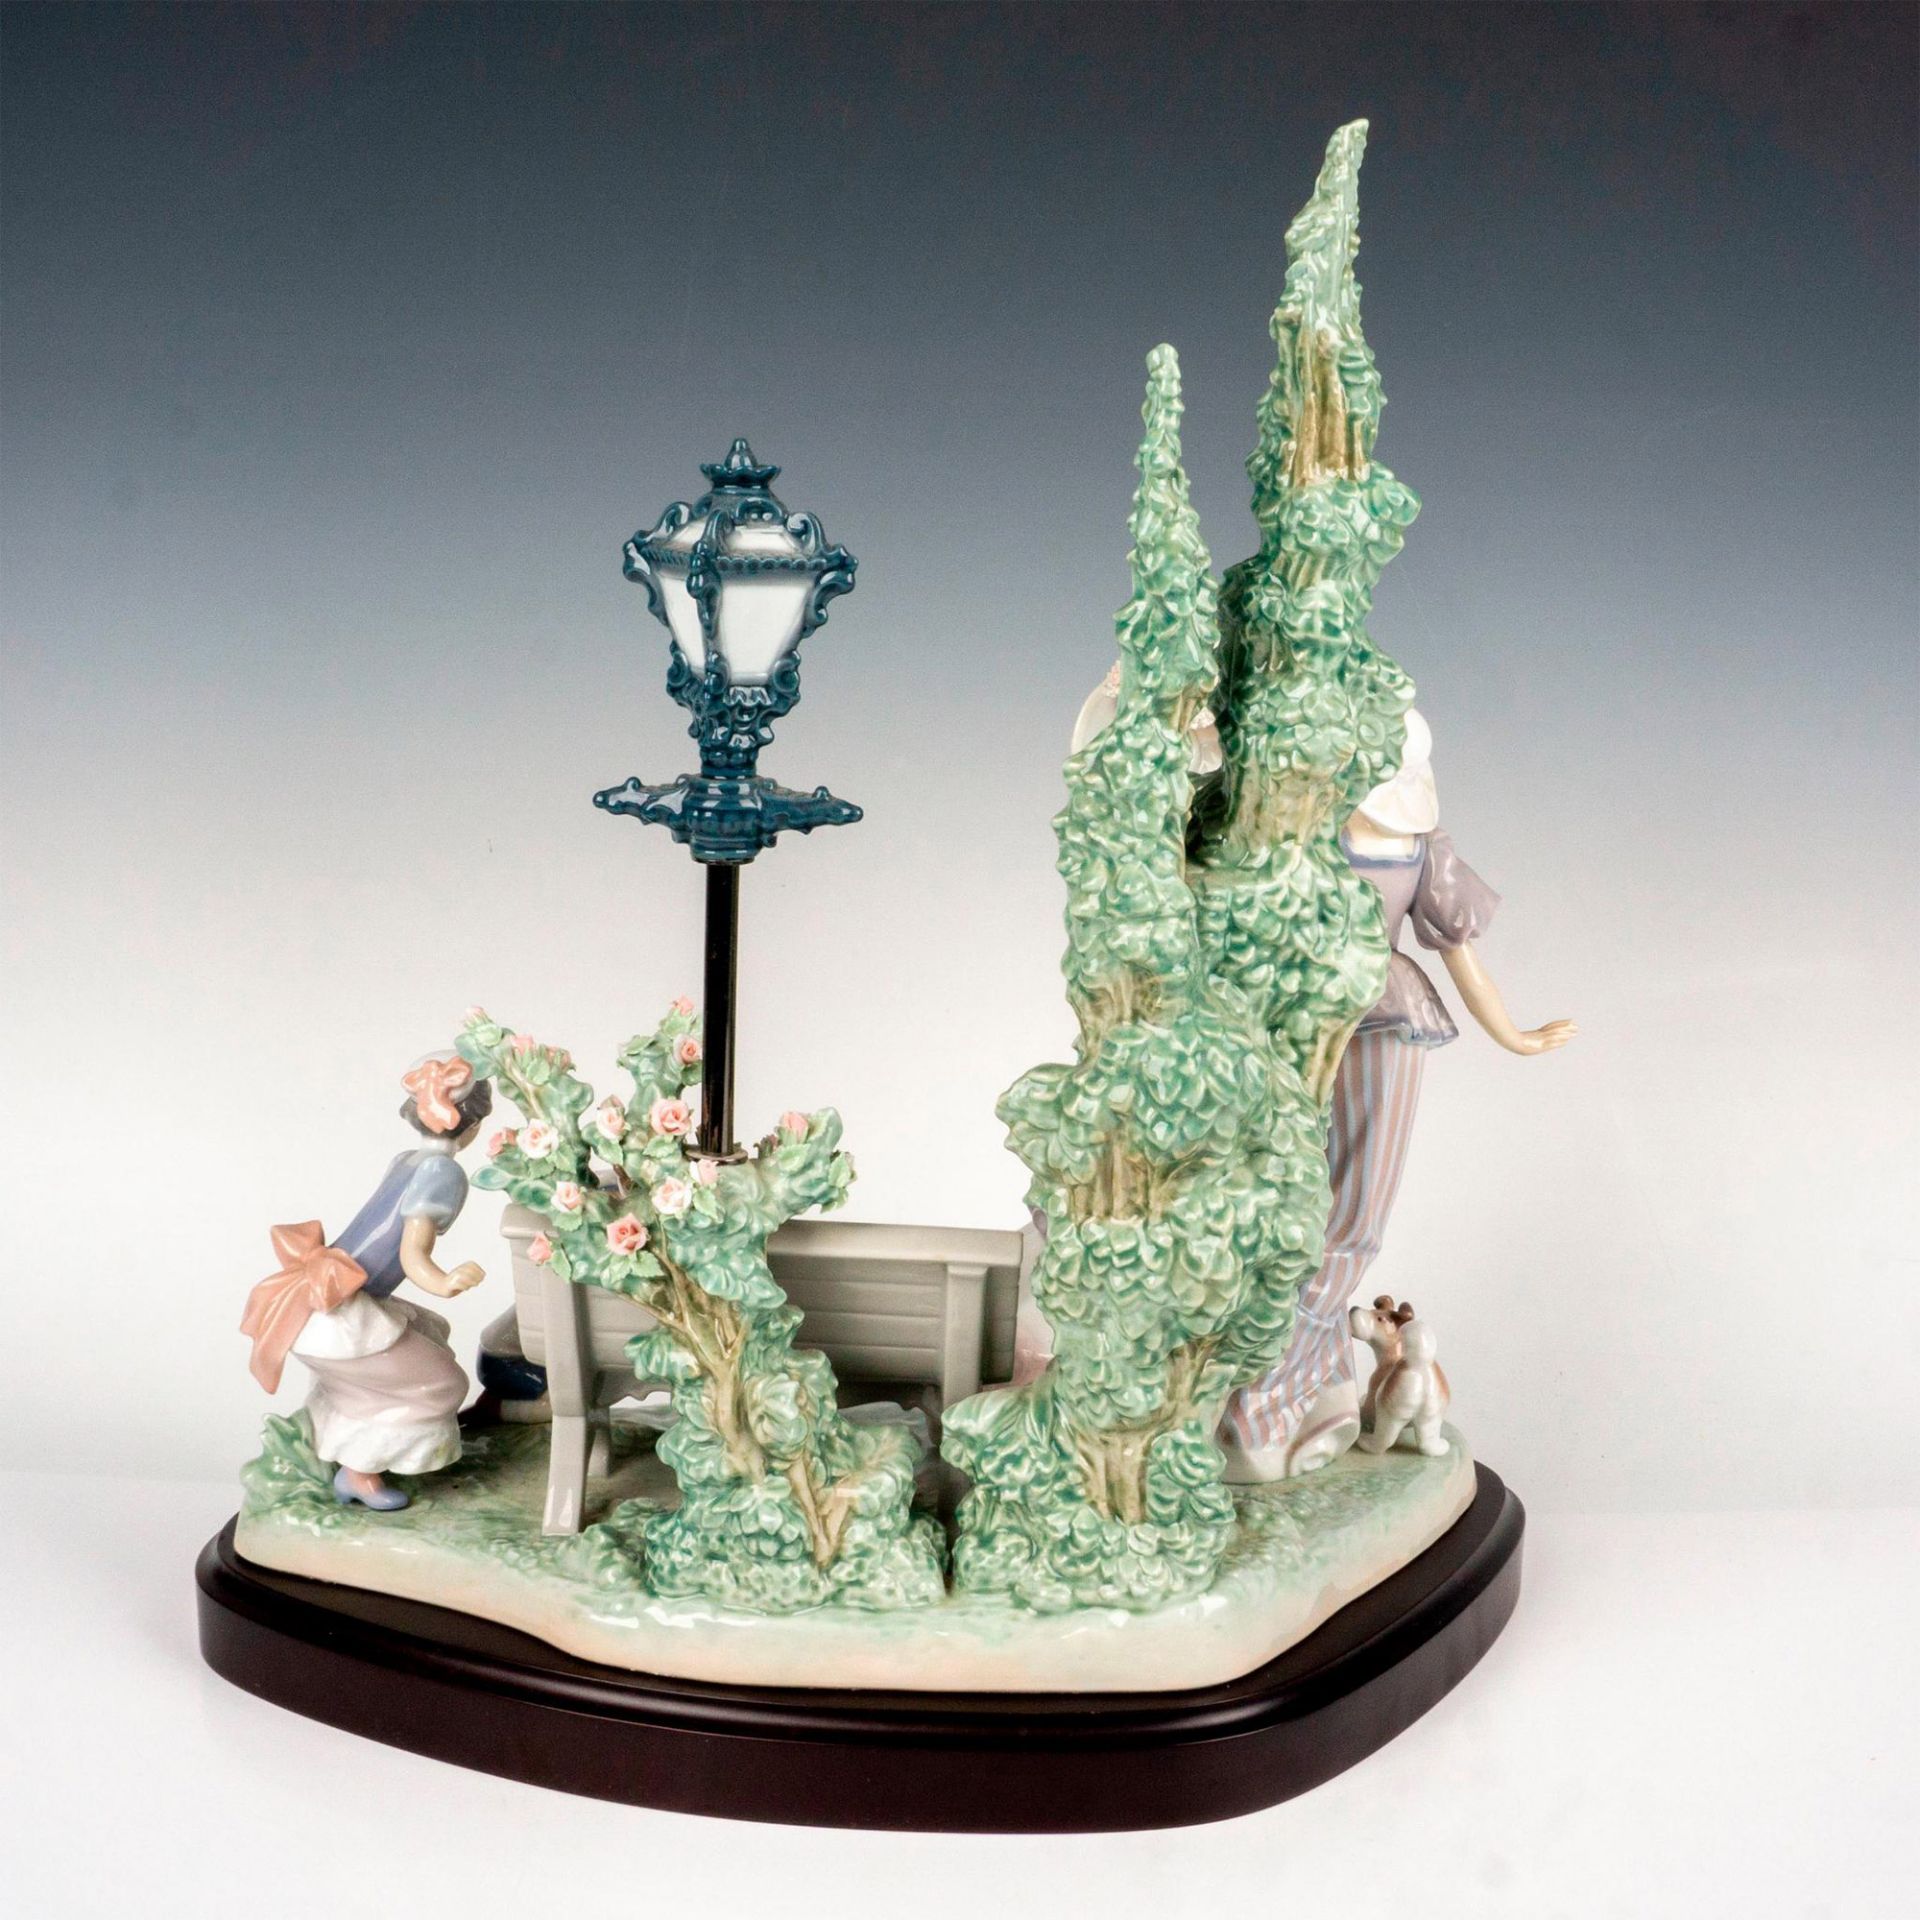 A Stroll in the Park 1001519, Signed - Lladro Figurine + Base - Image 2 of 3